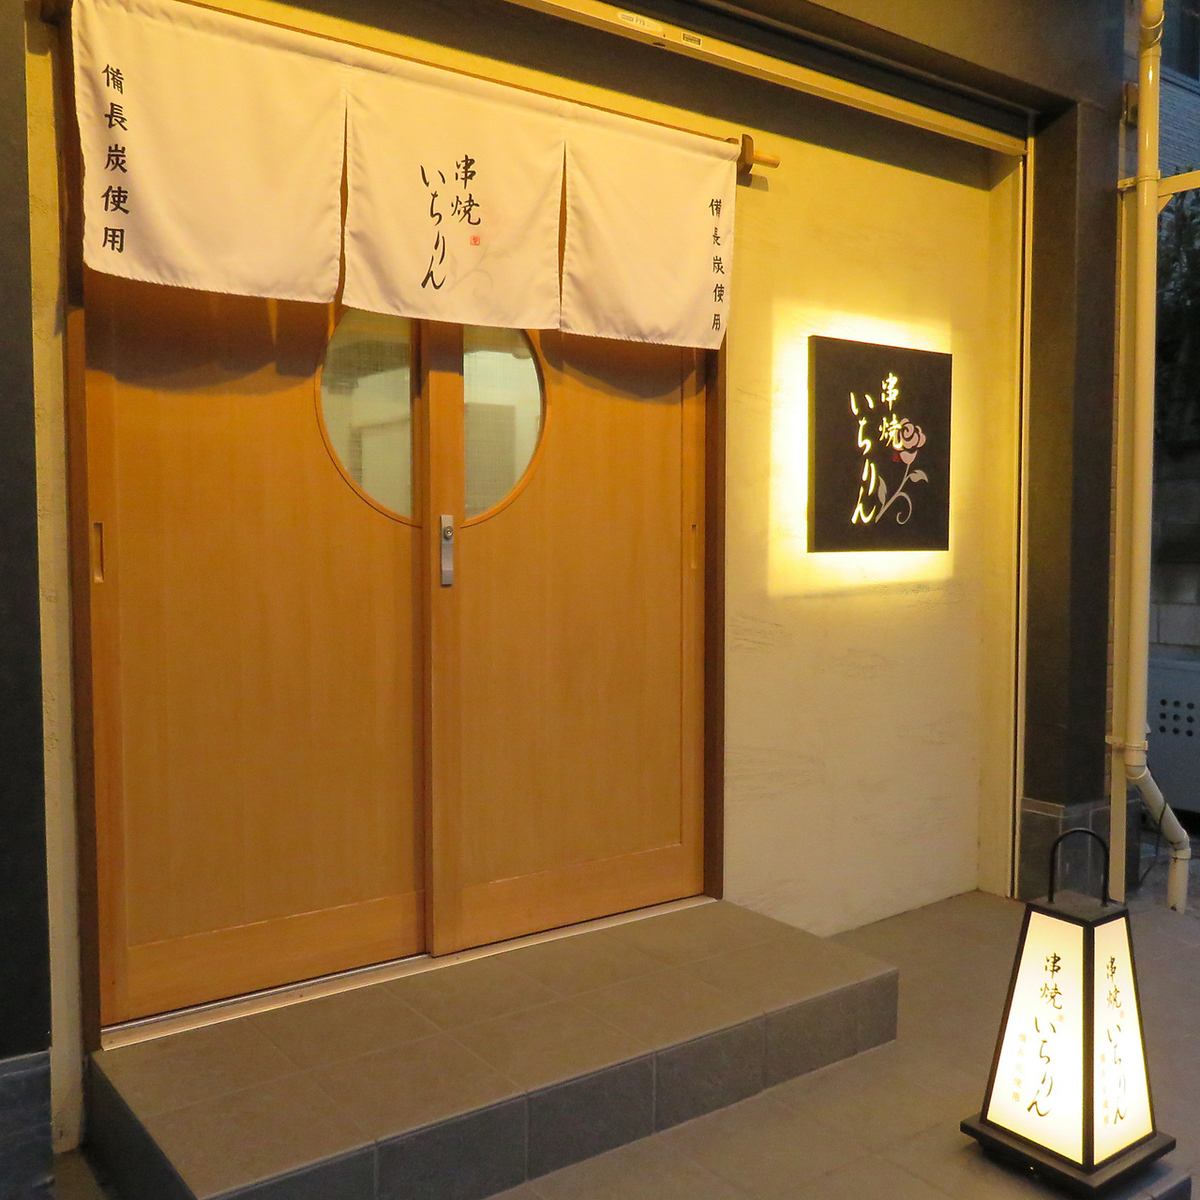 A 2-minute walk from Hamura Station! Enjoy your meal in a calm atmosphere